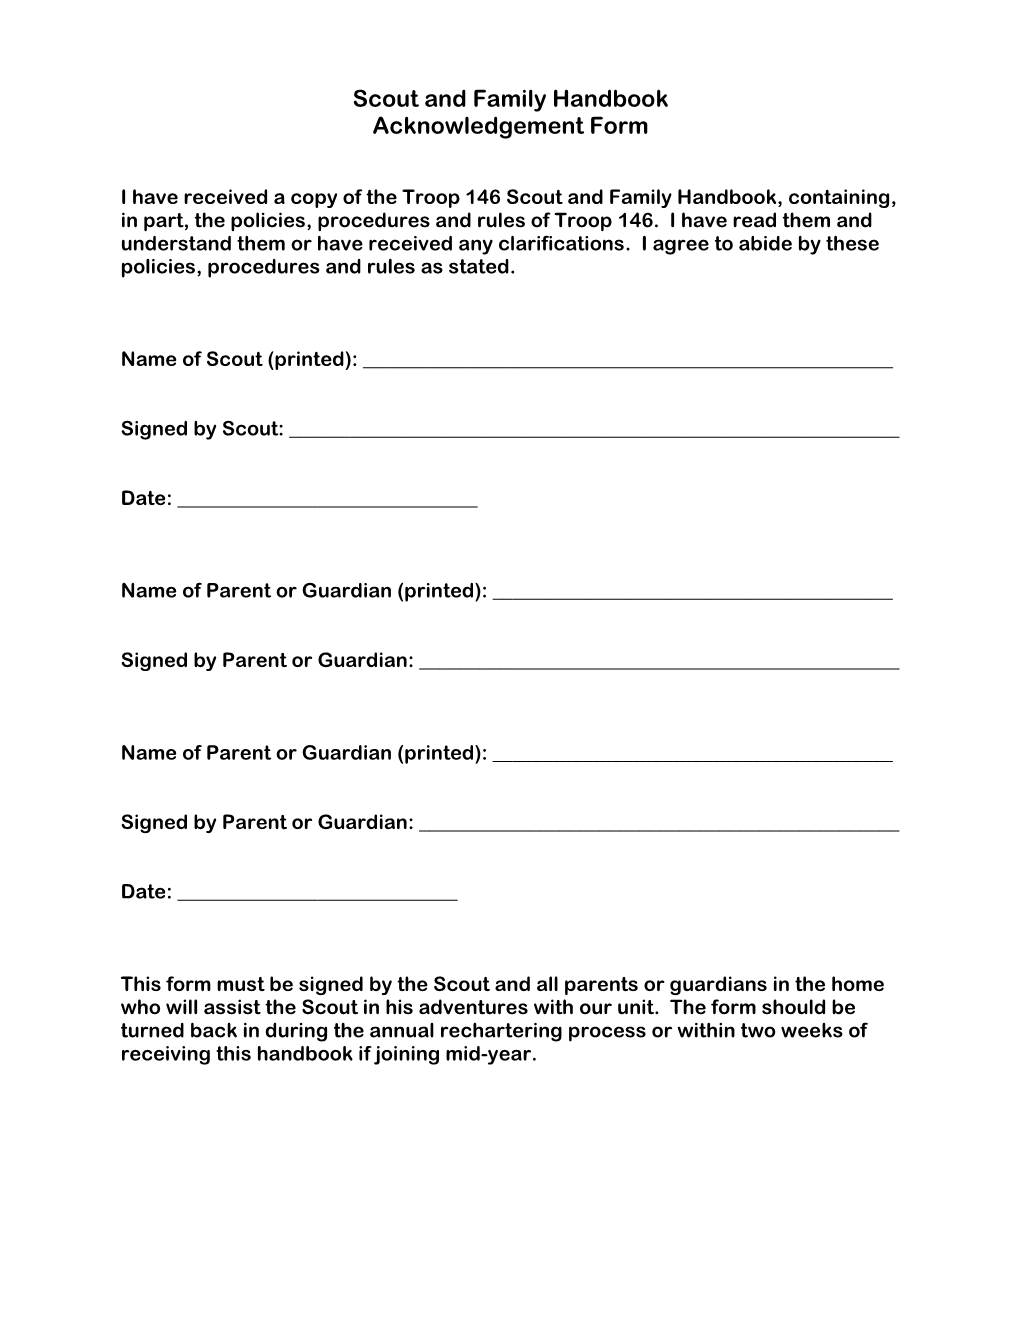 Scout and Family Handbook Acknowledgement Form